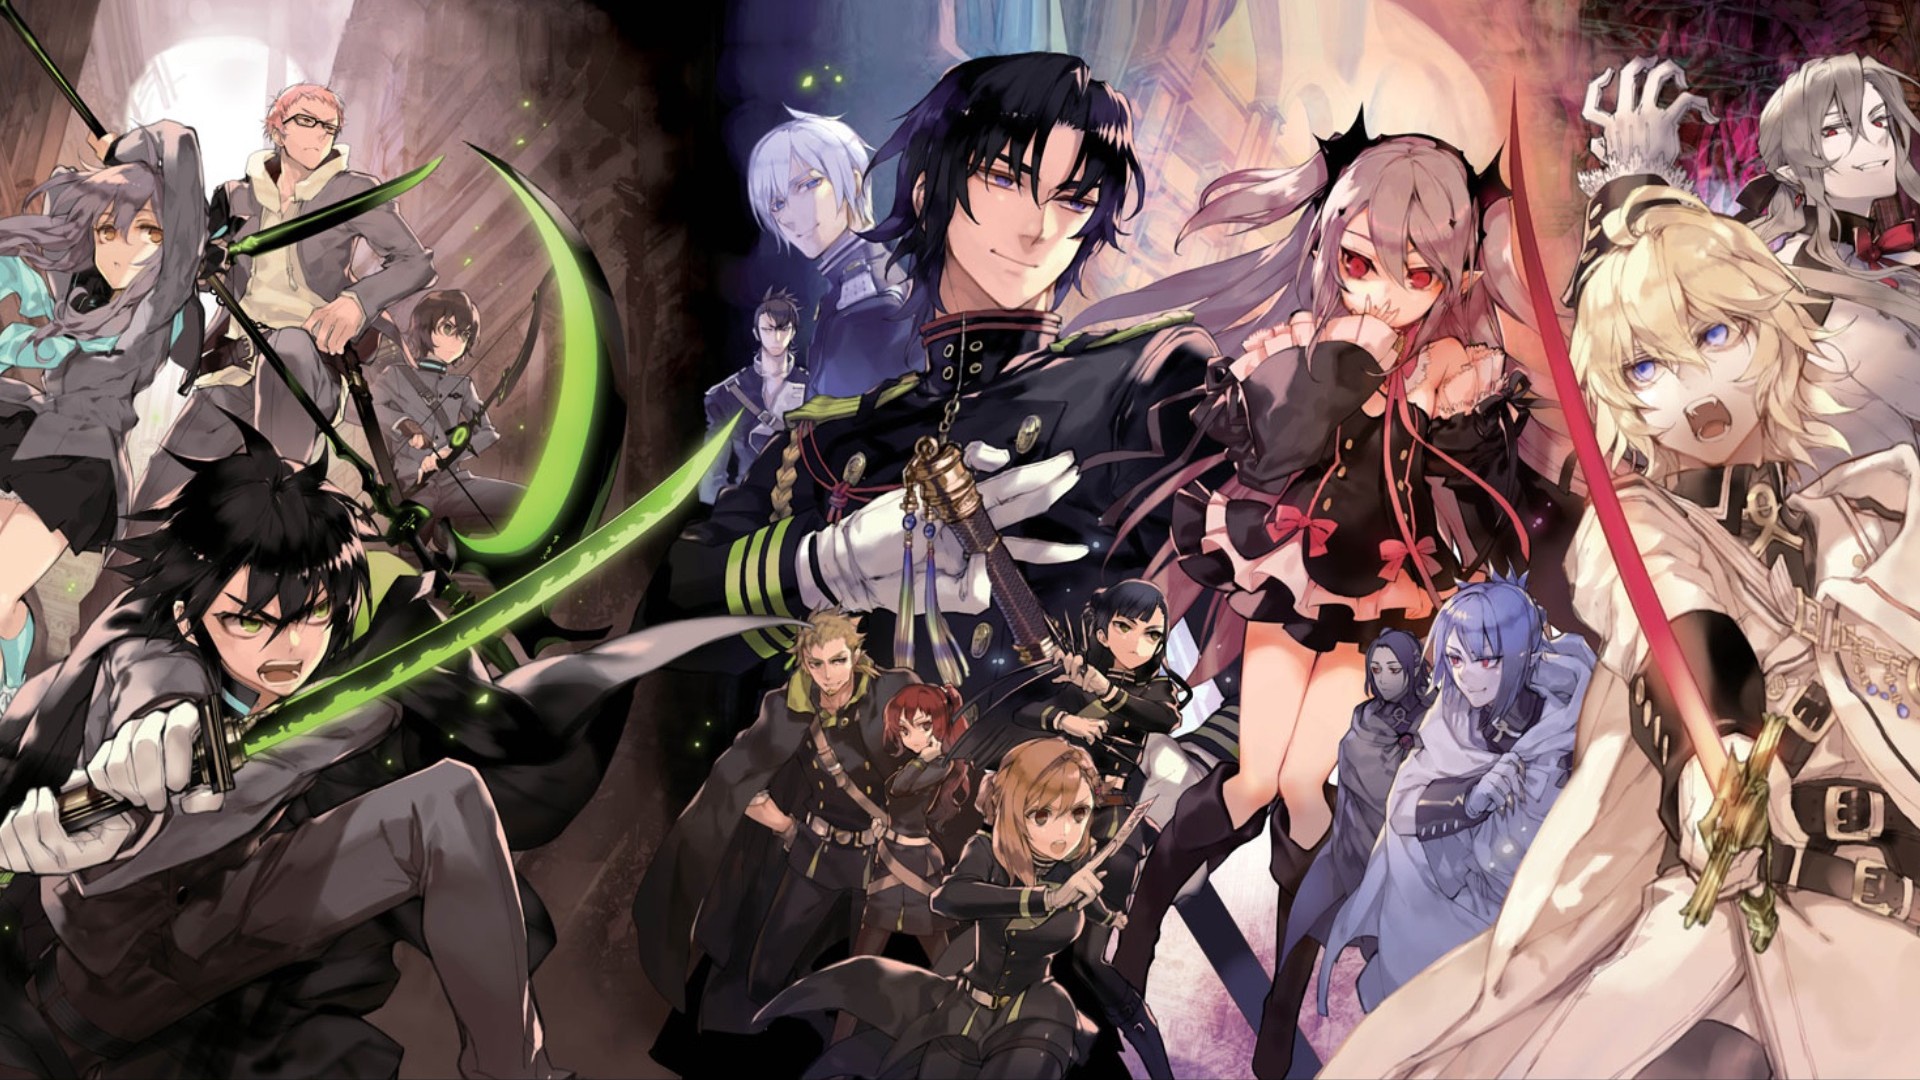 Owari No Seraph Wallpaper ·① Download Free Cool Hd Backgrounds For